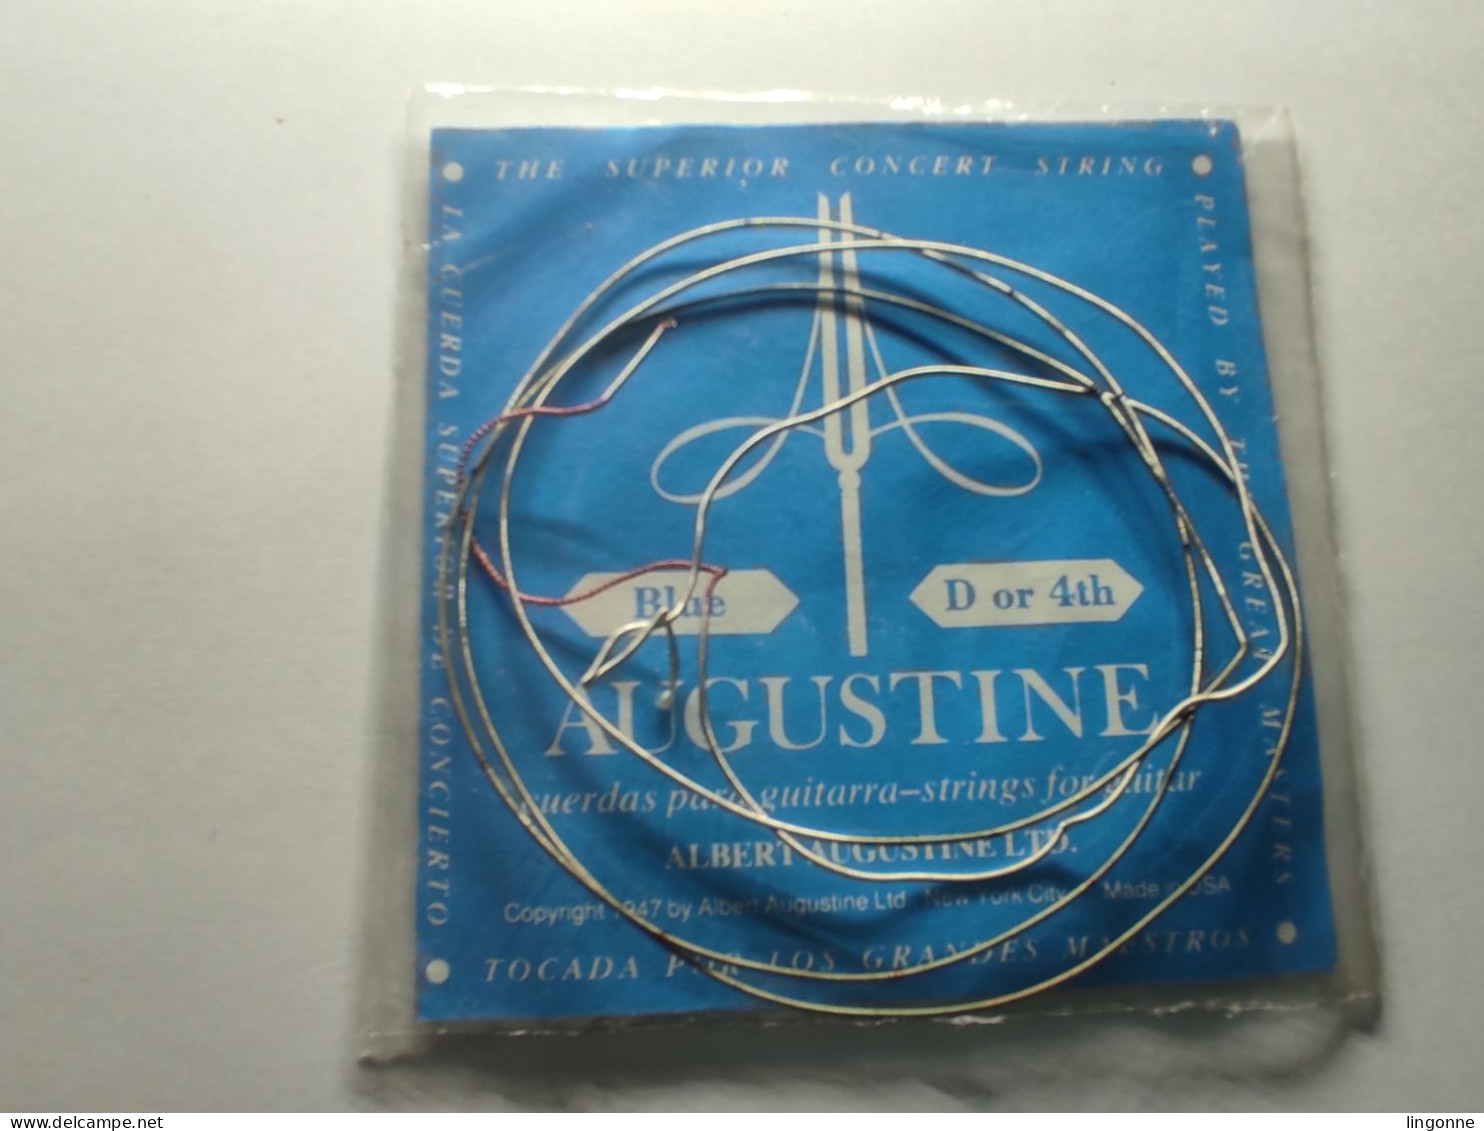 AUGUSTINE Blue D Or 4 Th CORDE POUR GUITARE Neuve Ou Occasion - Accessories & Sleeves